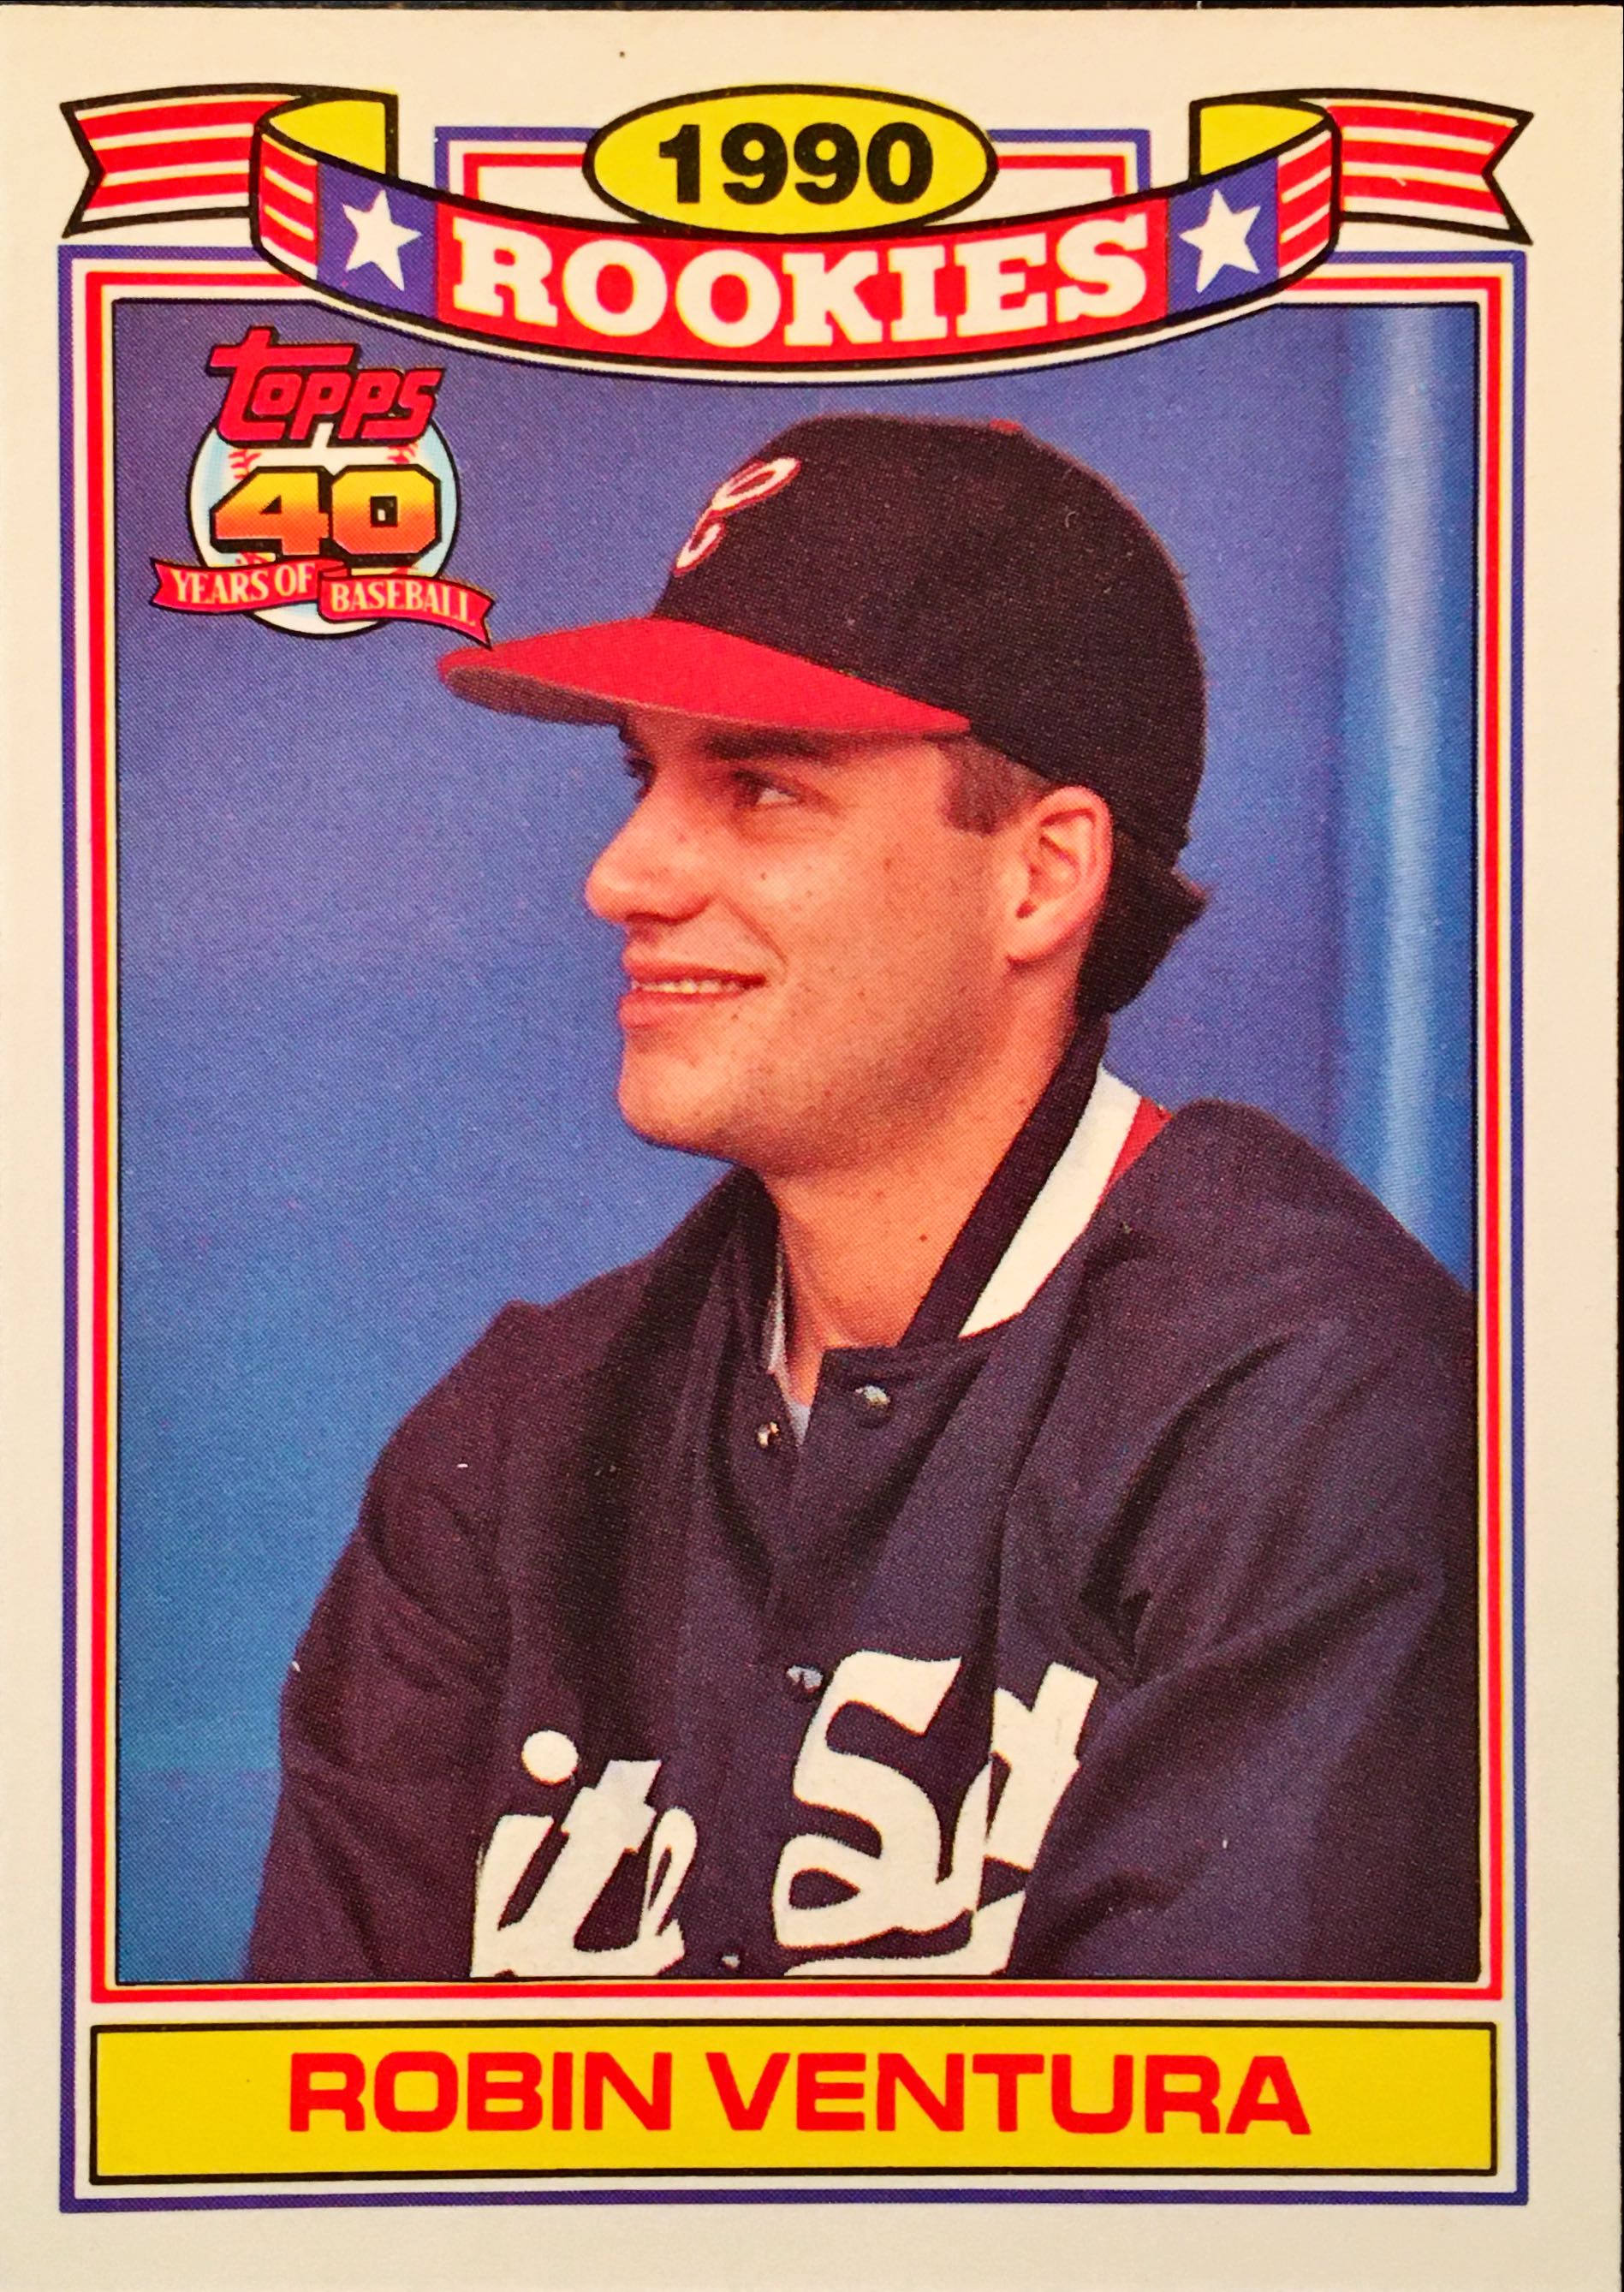 1991 Topps Rookies 31 front image